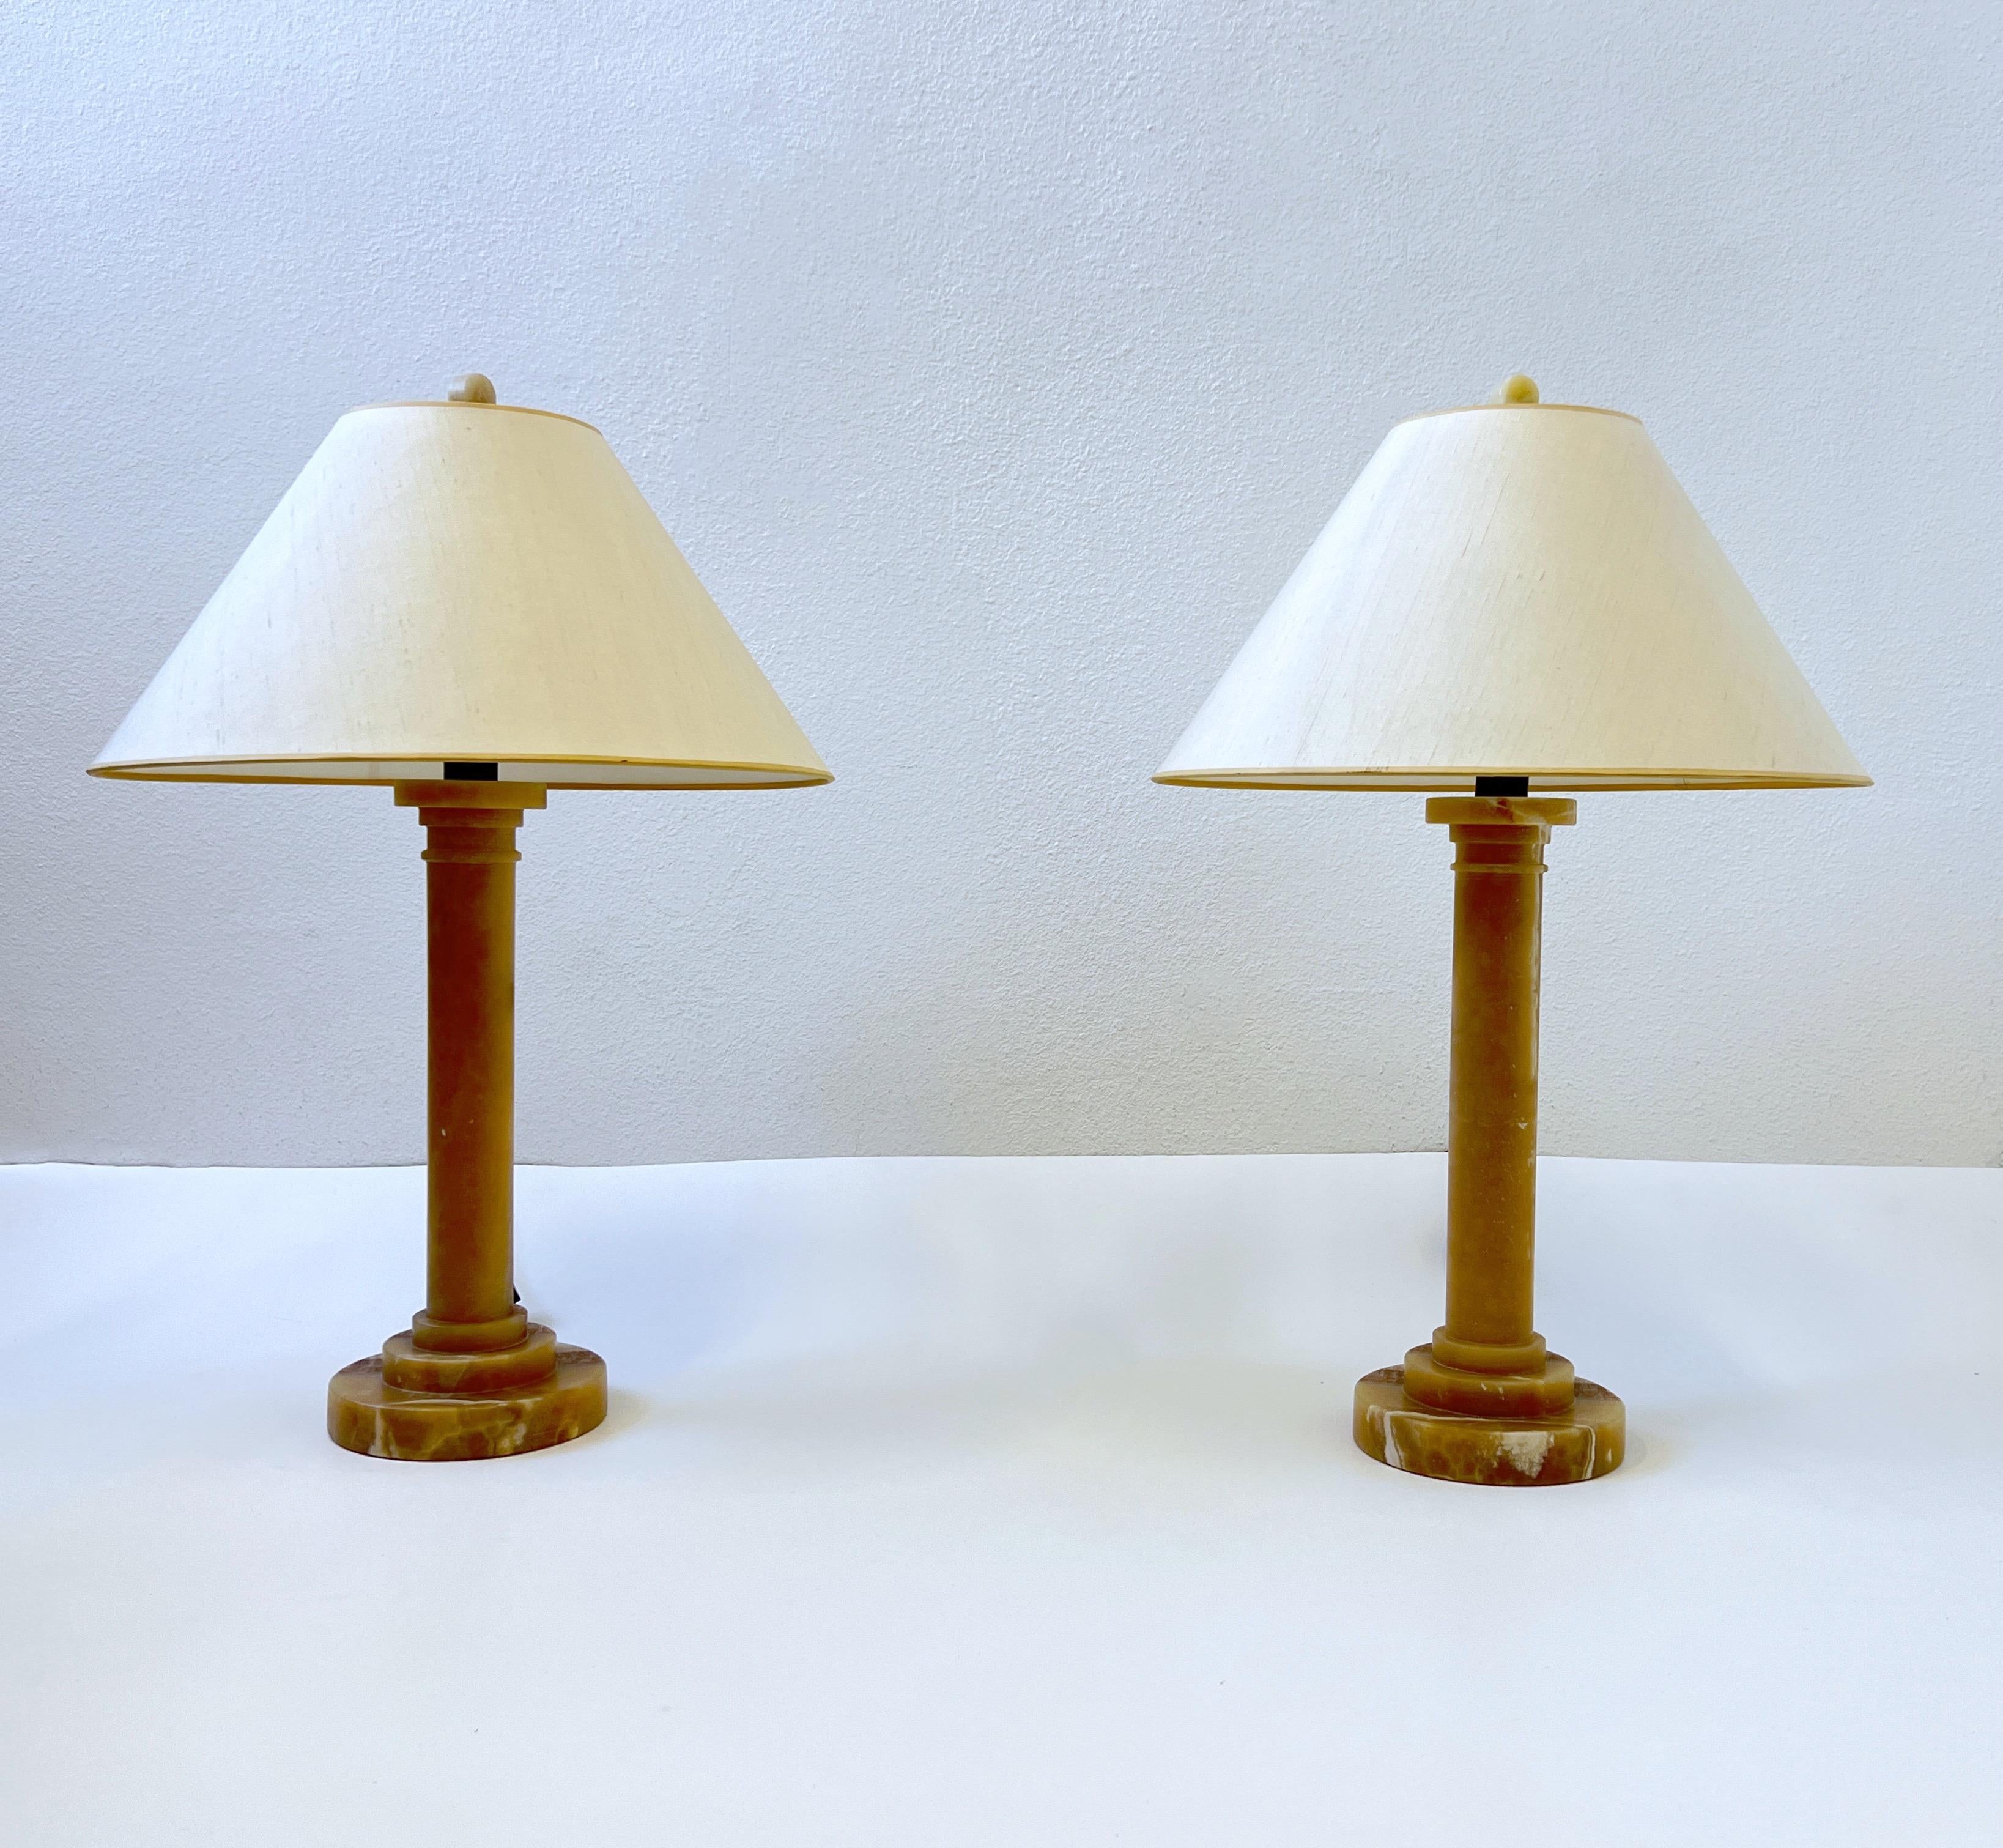 American Pair of Alabaster and Bronze Column Table Lamps by Donghia